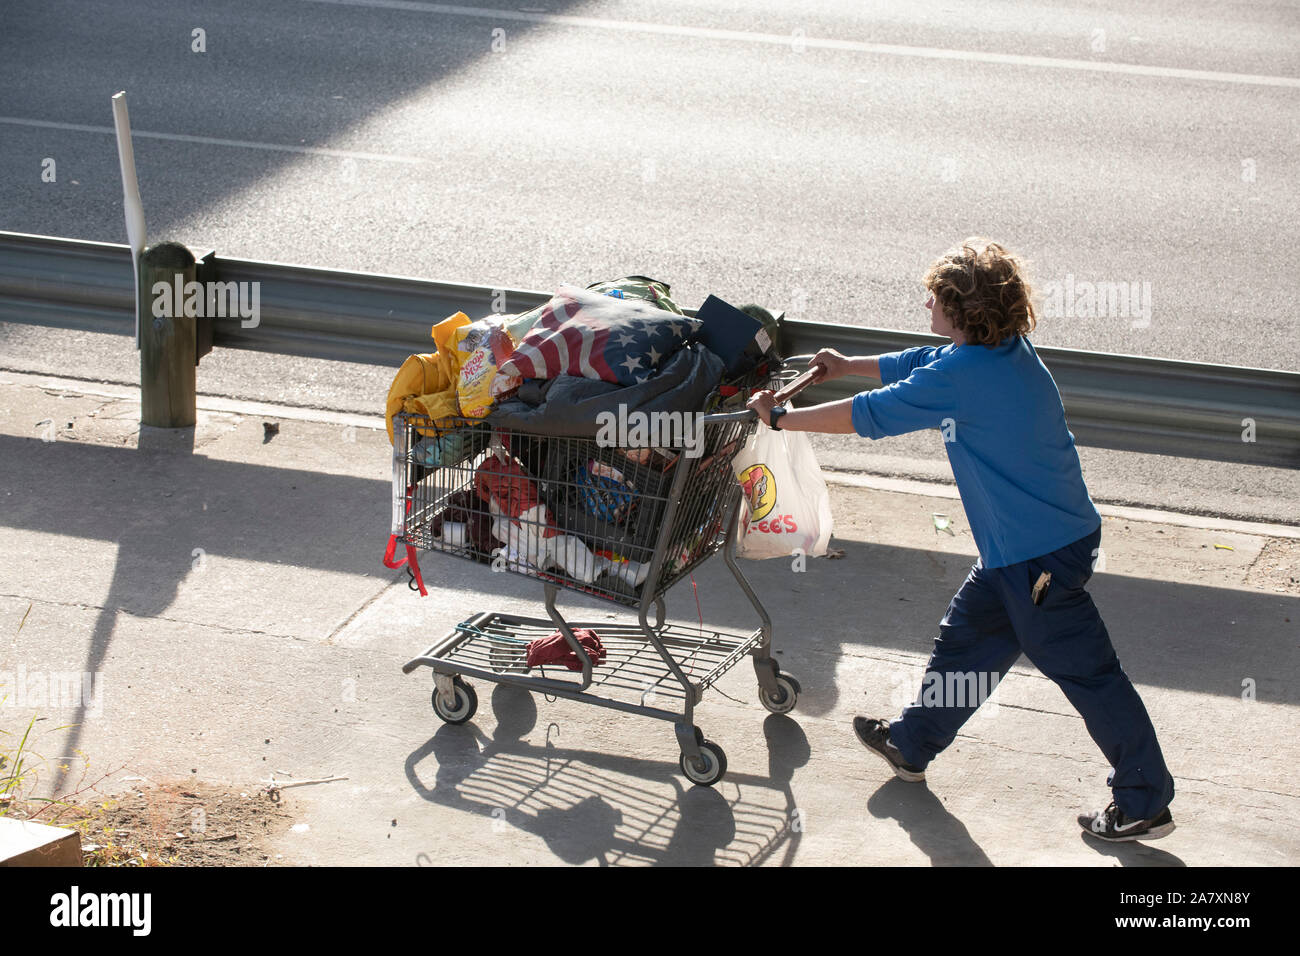 Homeless Texan leaves temporary encampment under highway overpass as state highway workers move in,  ordered by Texas Gov. Greg Abbott to clean up homeless areas in the public right-of-way. There are 17 identified sites scheduled for cleanup in the Austin area. Stock Photo